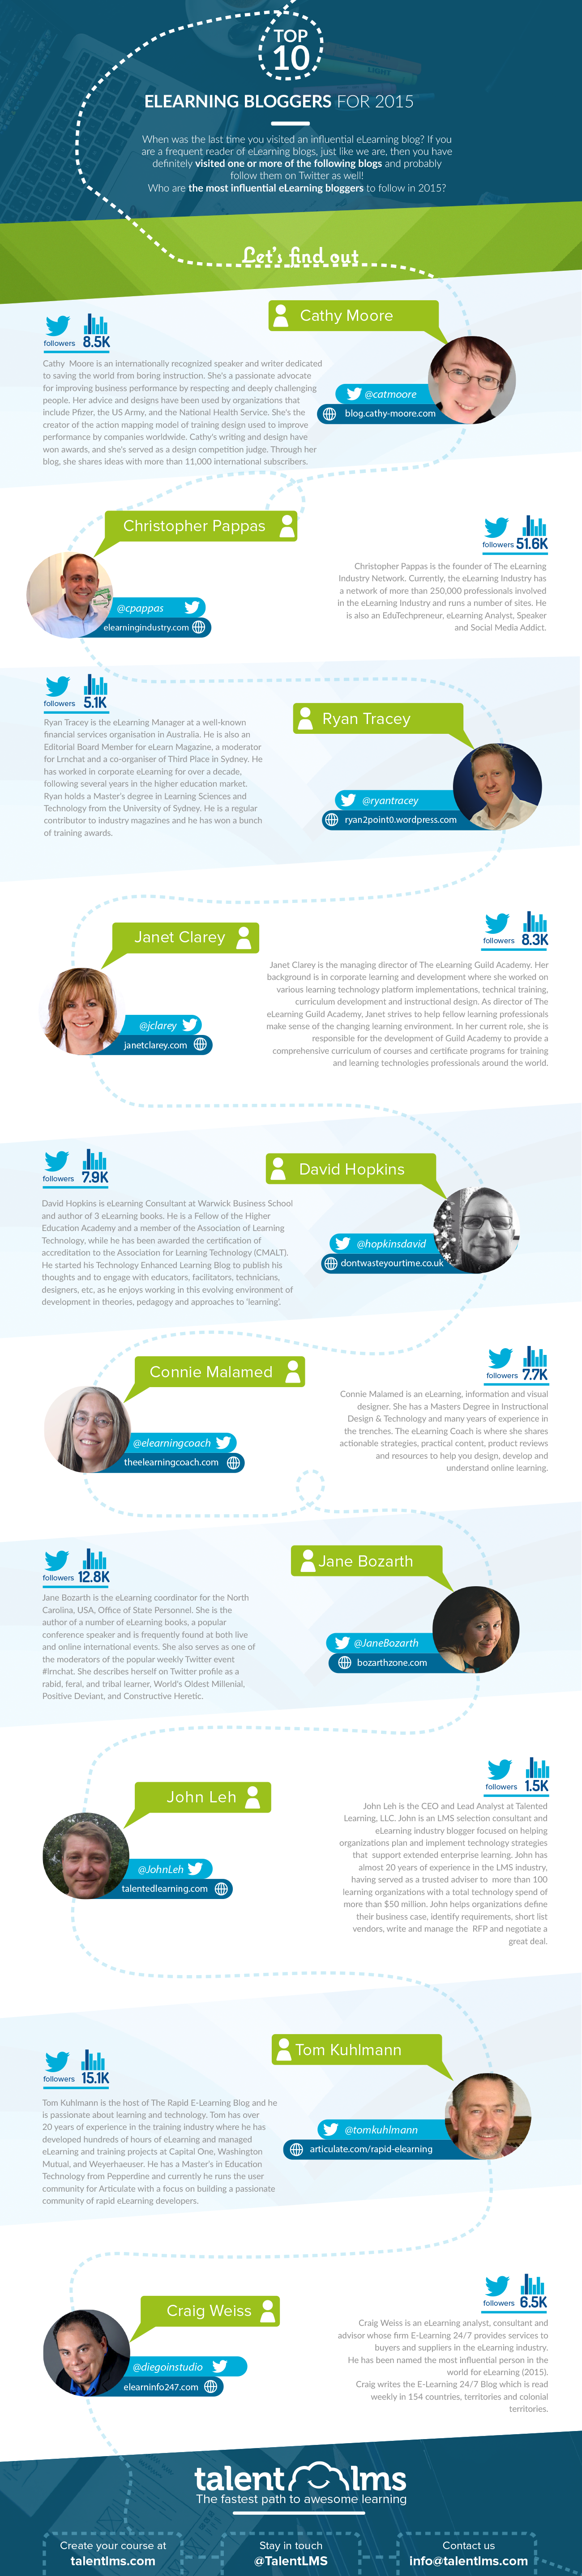 top-10-elearning-influencers-infographic